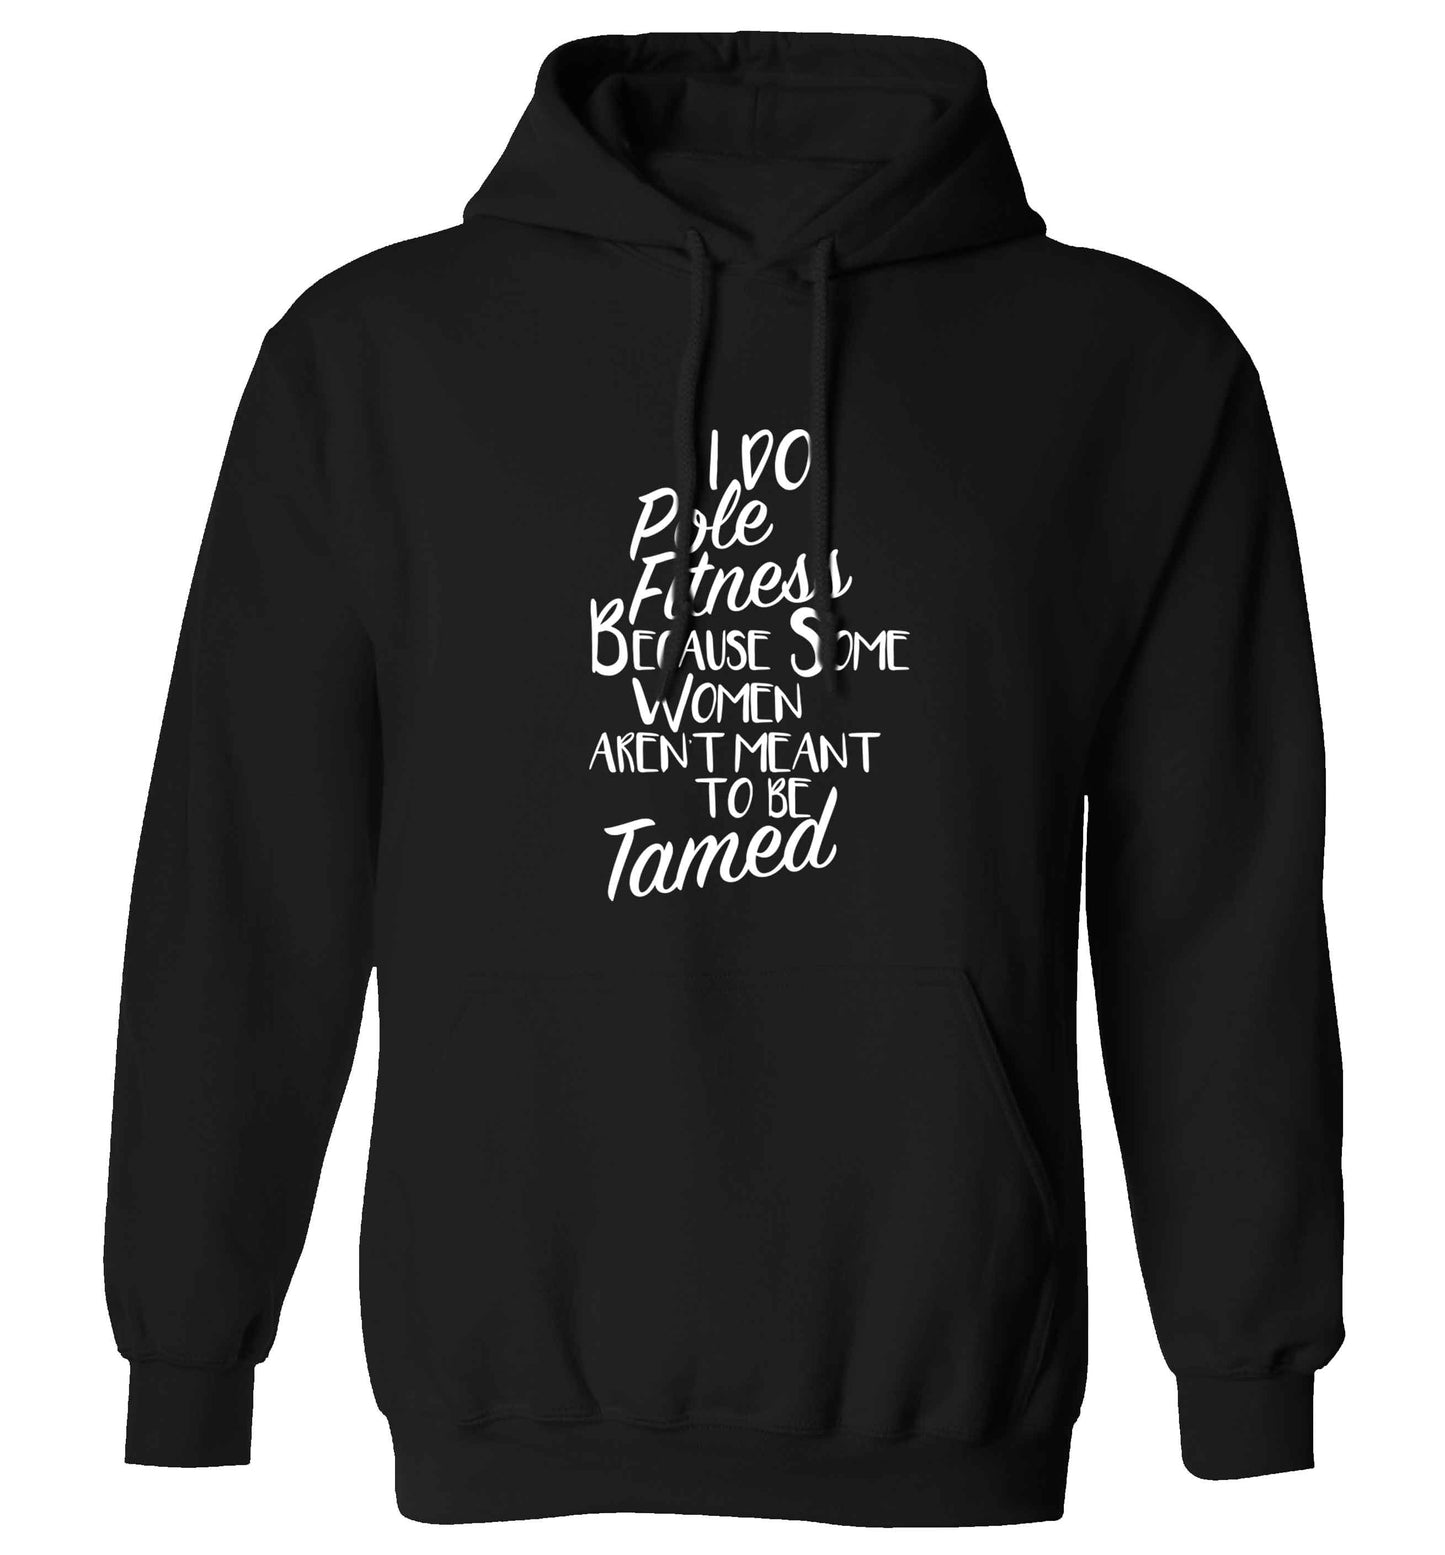 I do pole fitness because some women aren't meant to be tamed adults unisex black hoodie 2XL